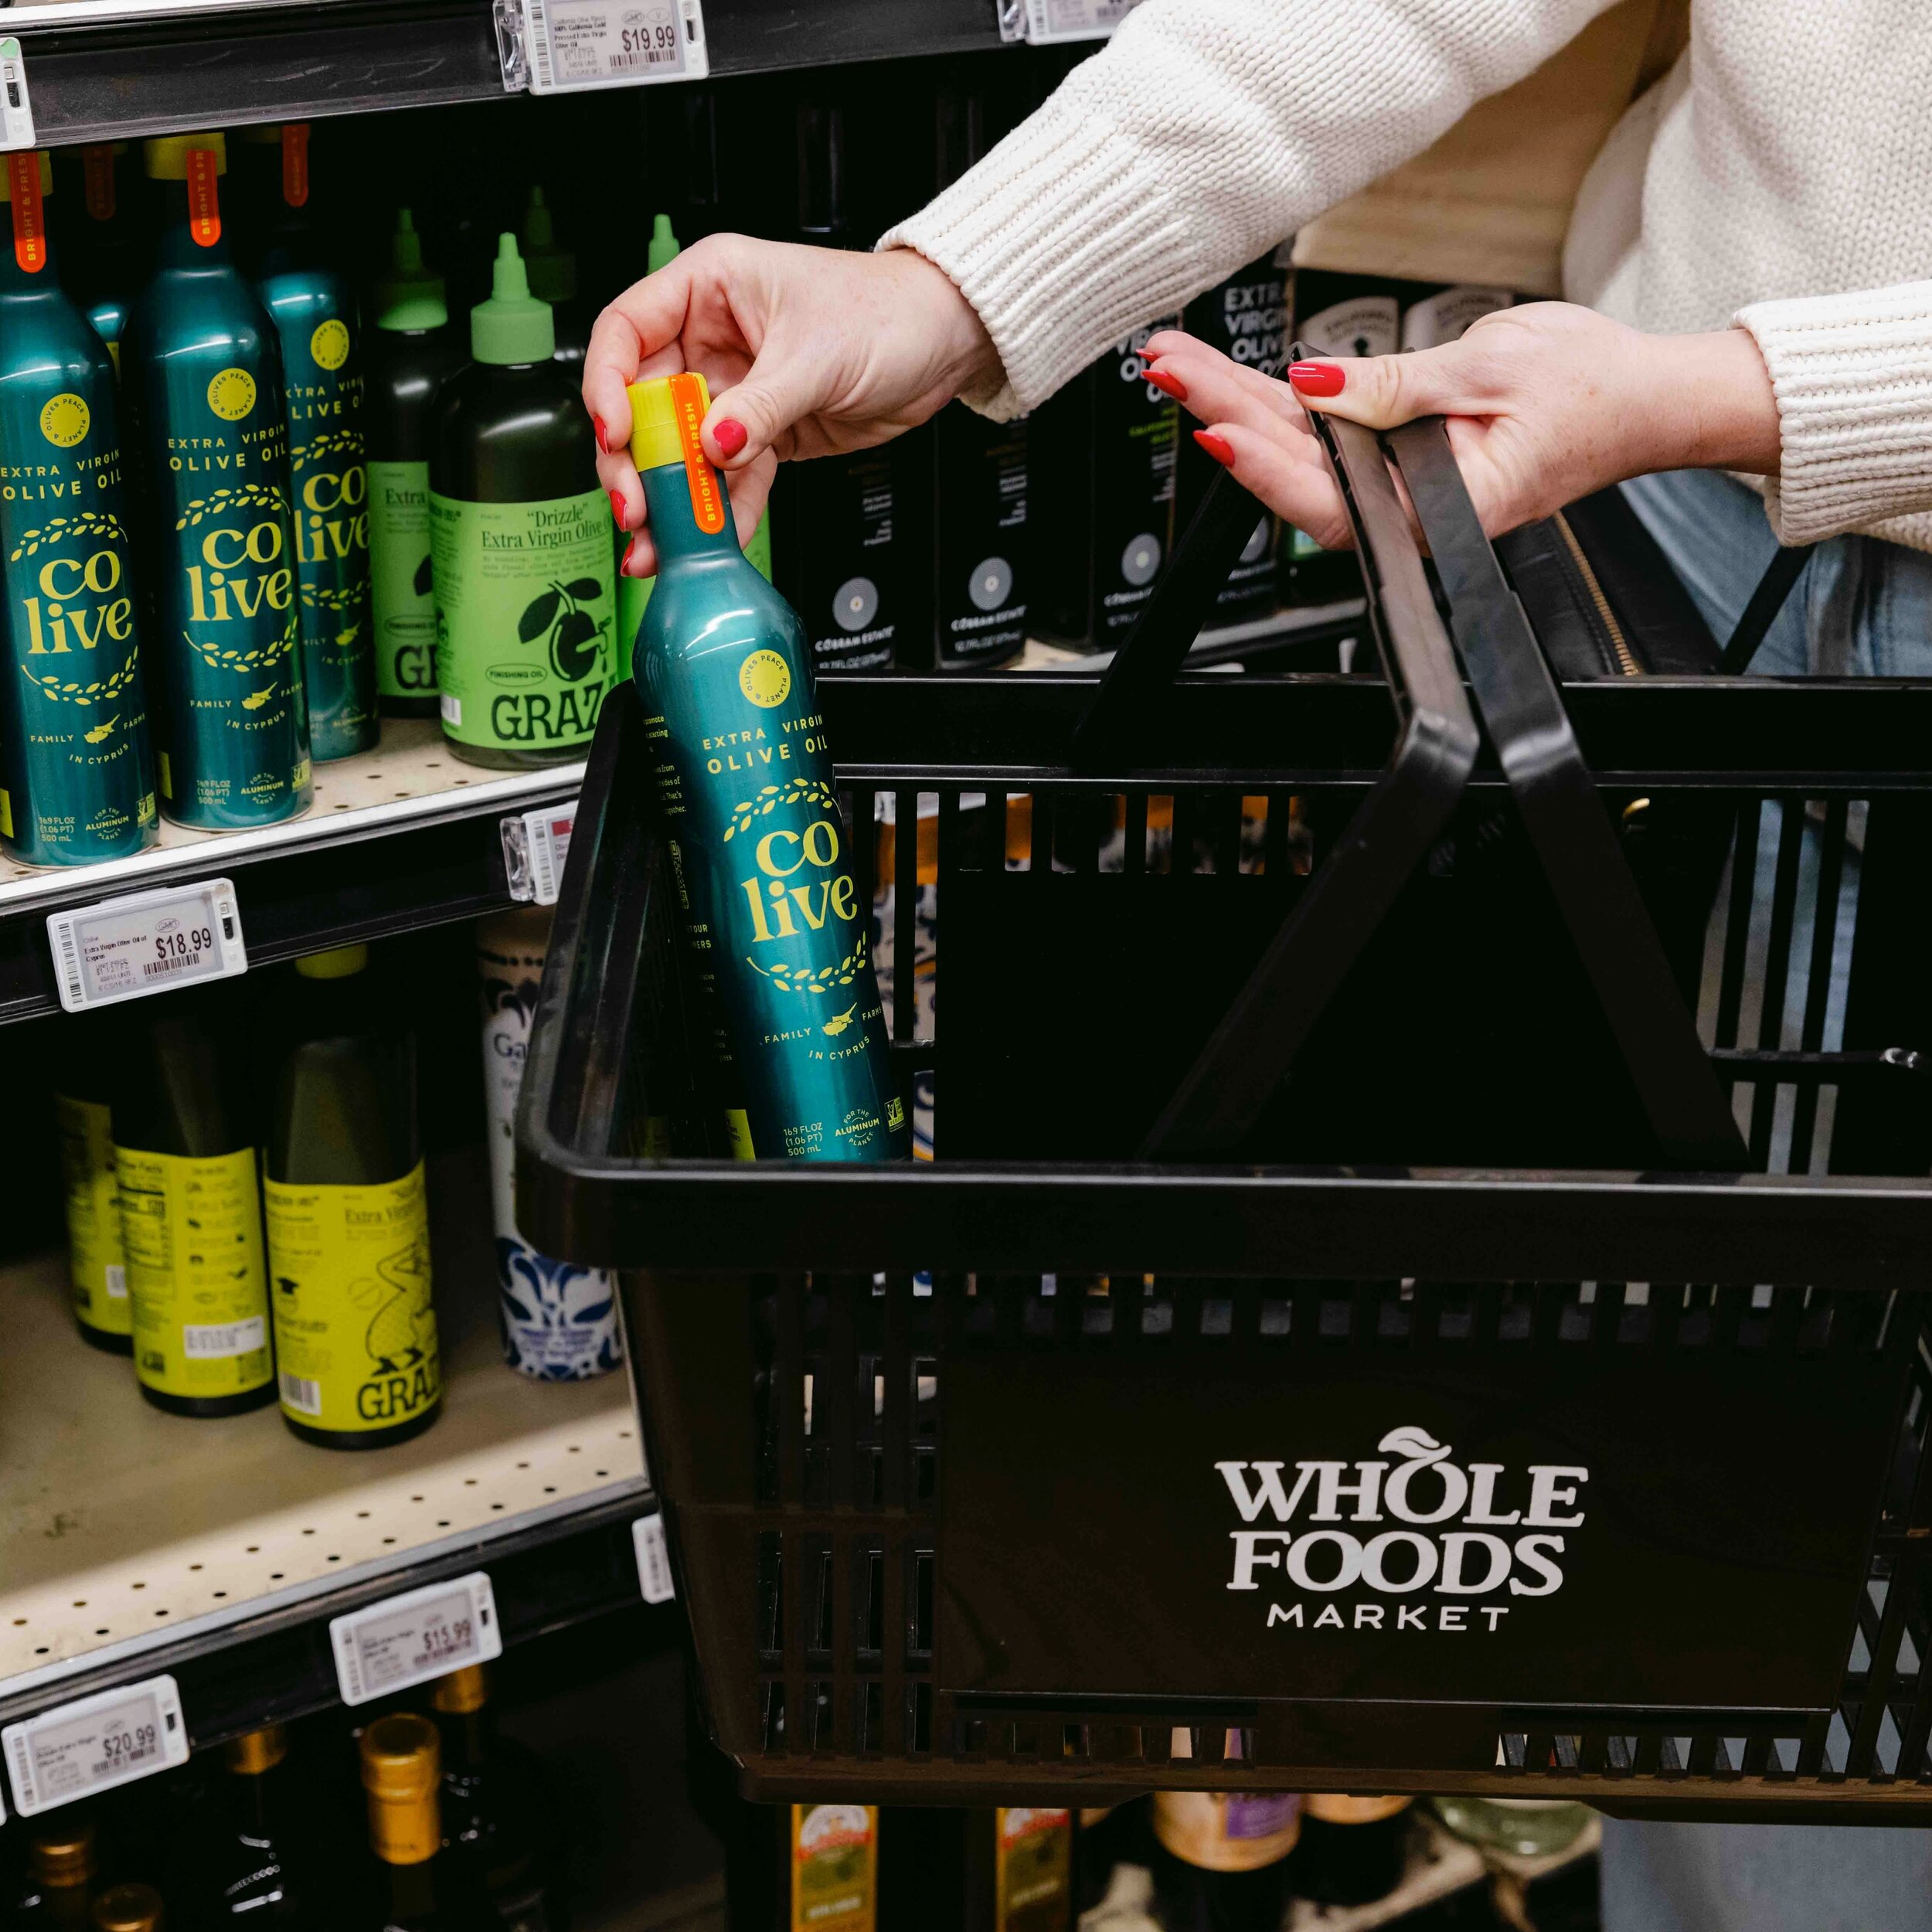 👋Raise your hand if grocery shopping is your favorite hobby

We love a long, luxurious lap around our favorite stores, often while we&rsquo;re capturing shopper content, which can be so instrumental to any brand&rsquo;s retail velocity. We want your